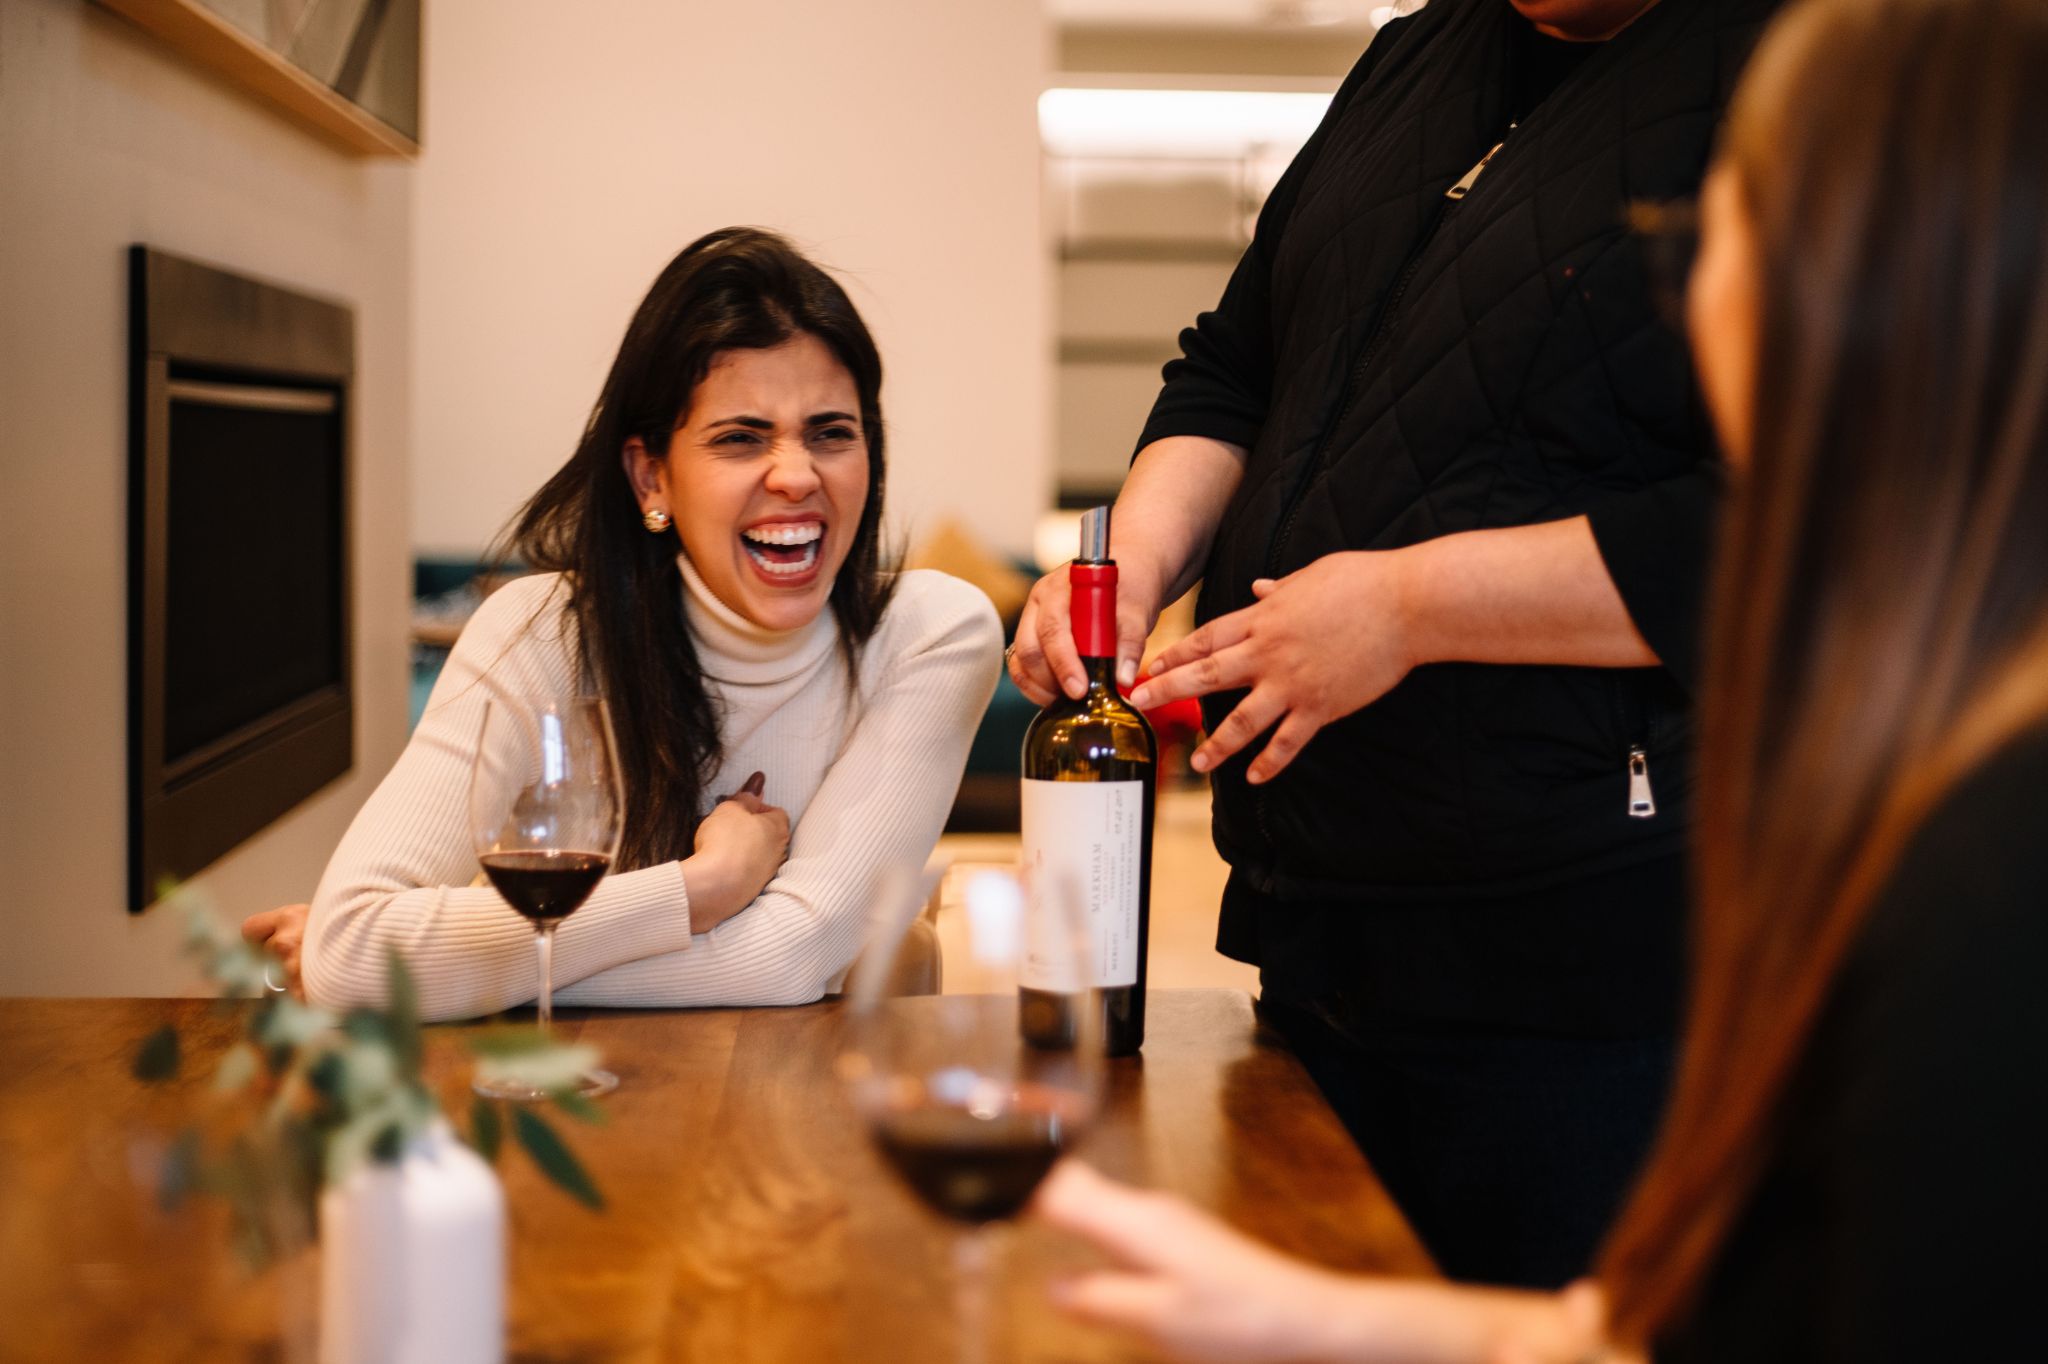 Woman laughing and enjoying her experience at Markham Tasting Room